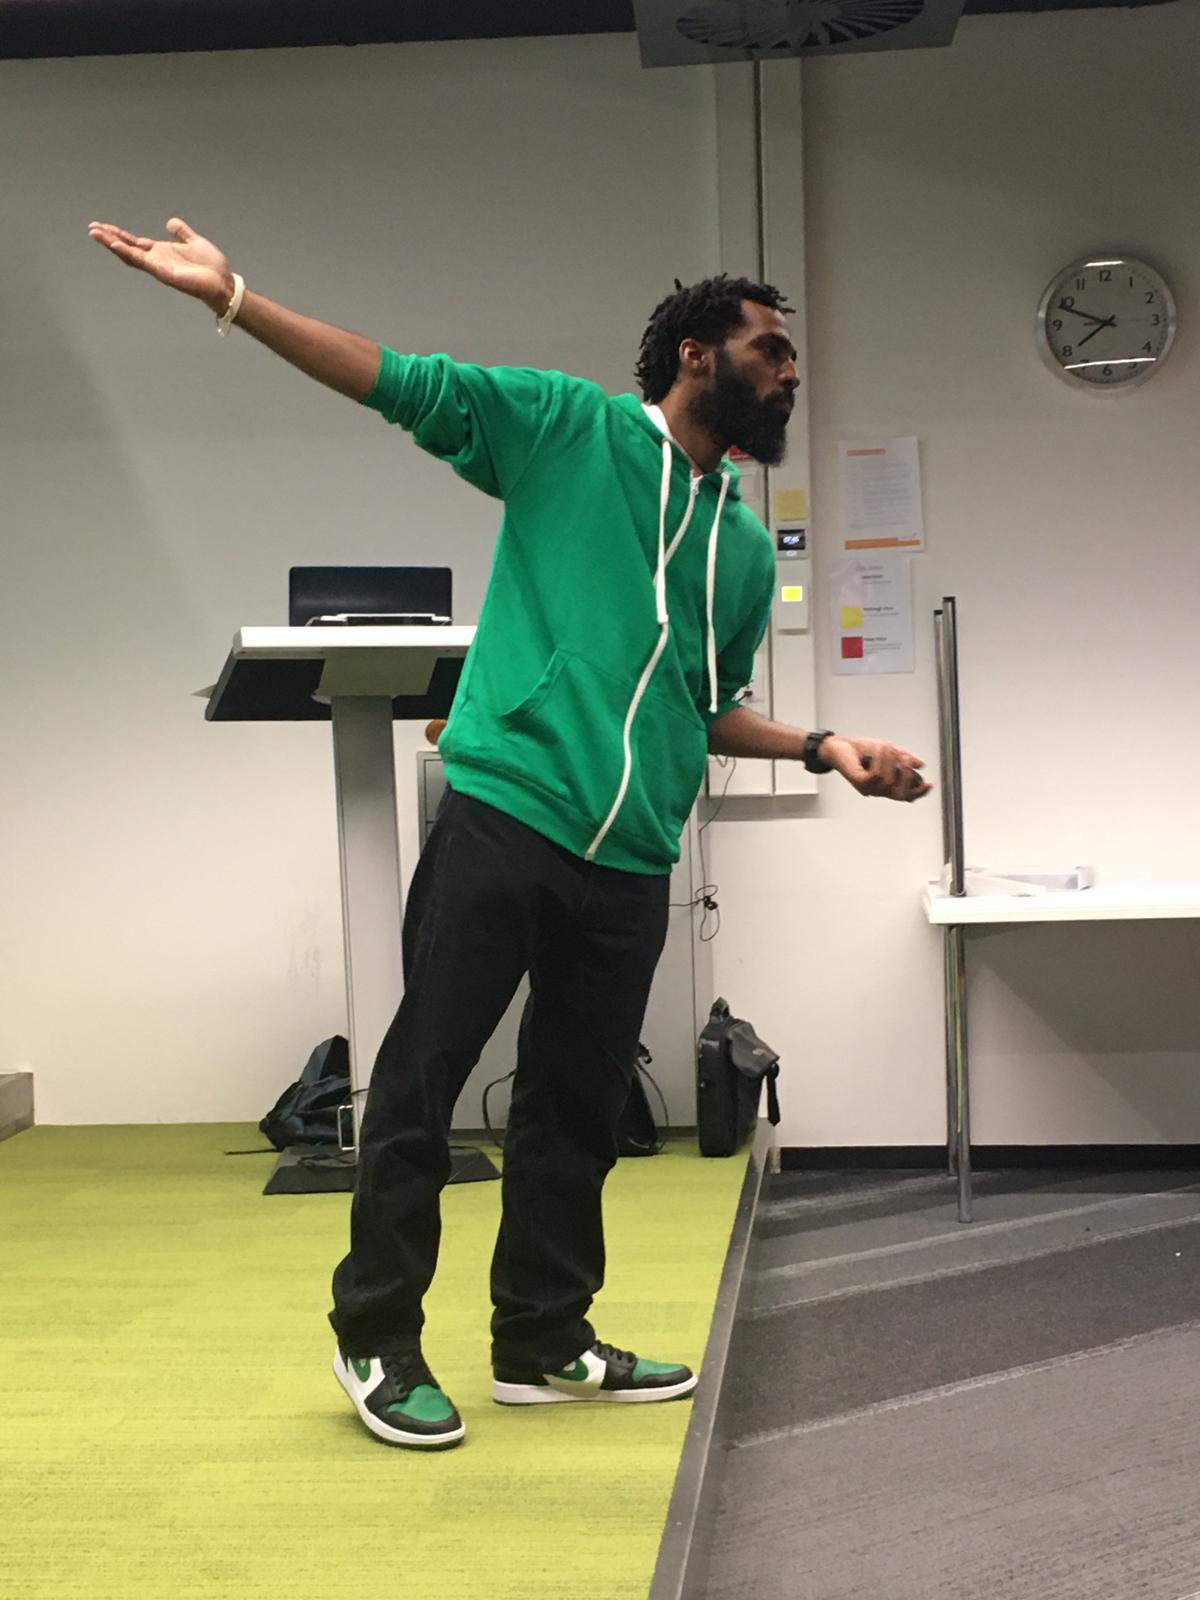 This is a photograph of the trainer and speaker Josuël Rogers pointing during a keynote speech